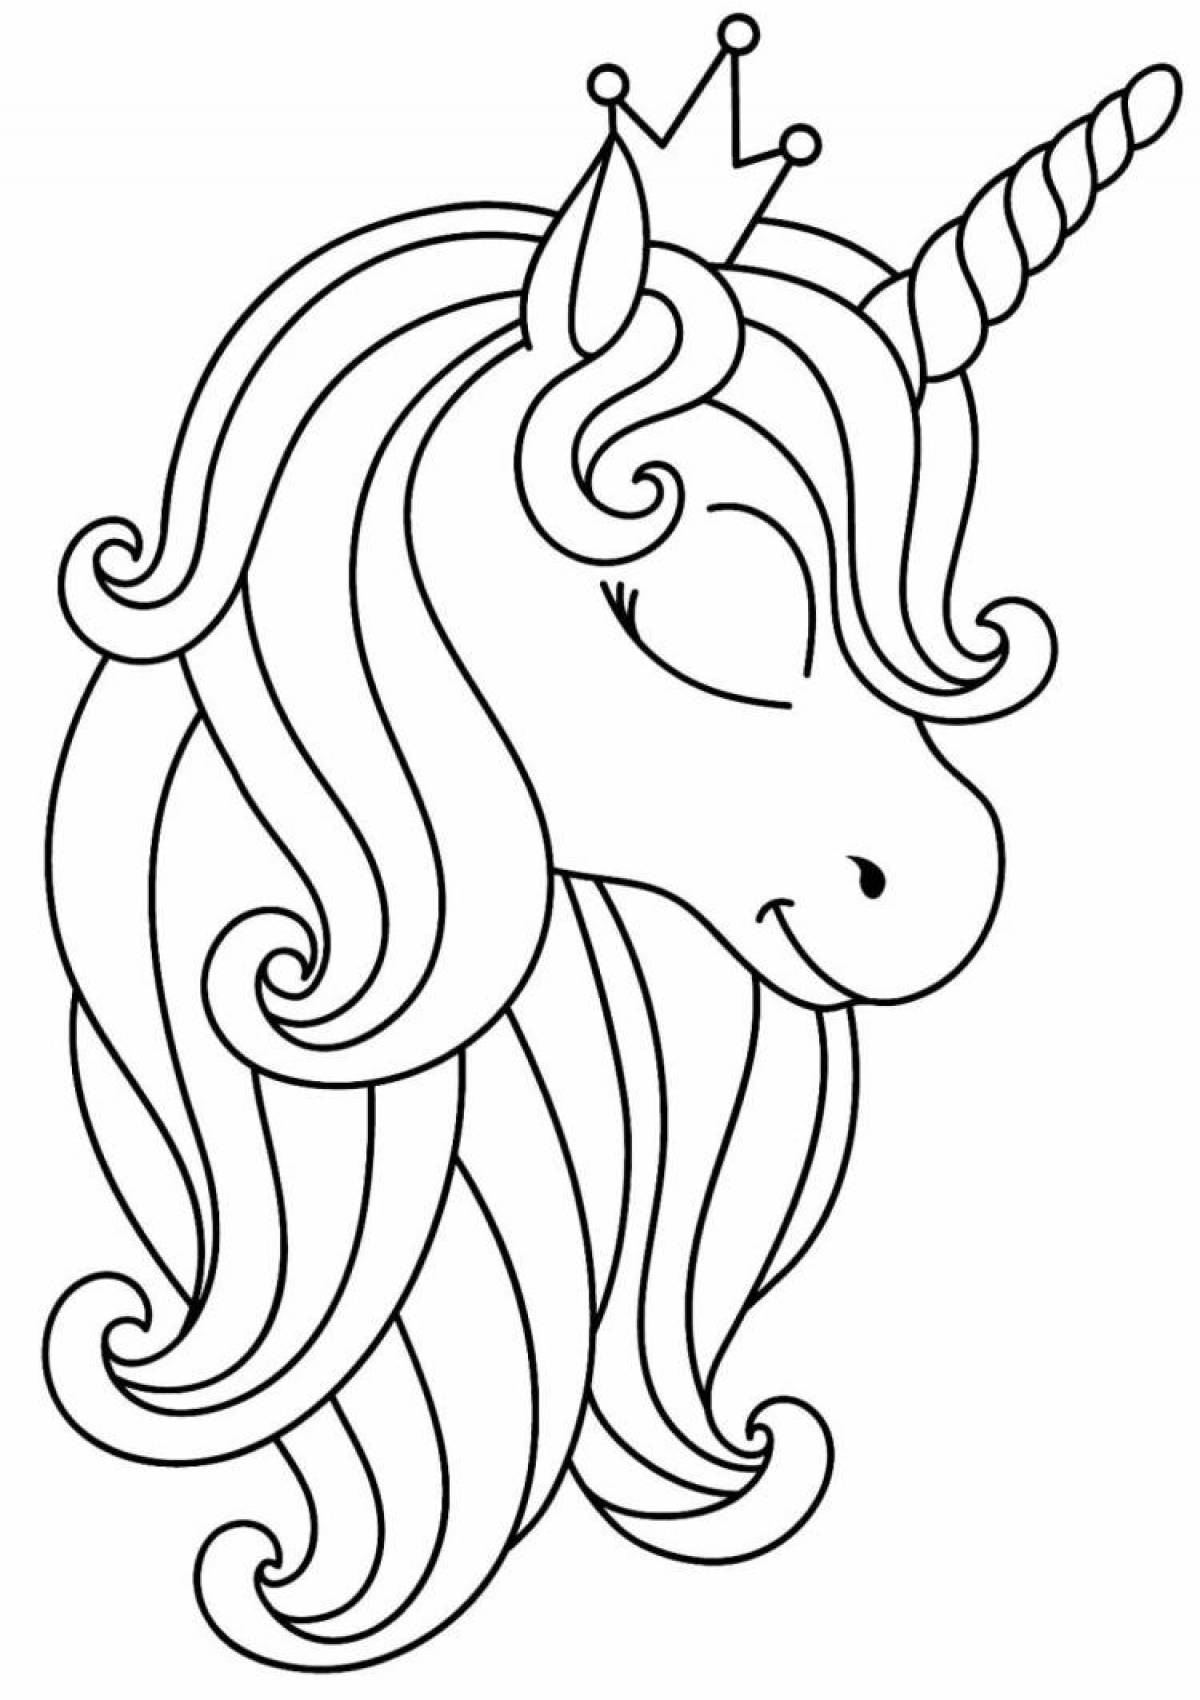 Glorious unicorn coloring book for kids 6-7 years old